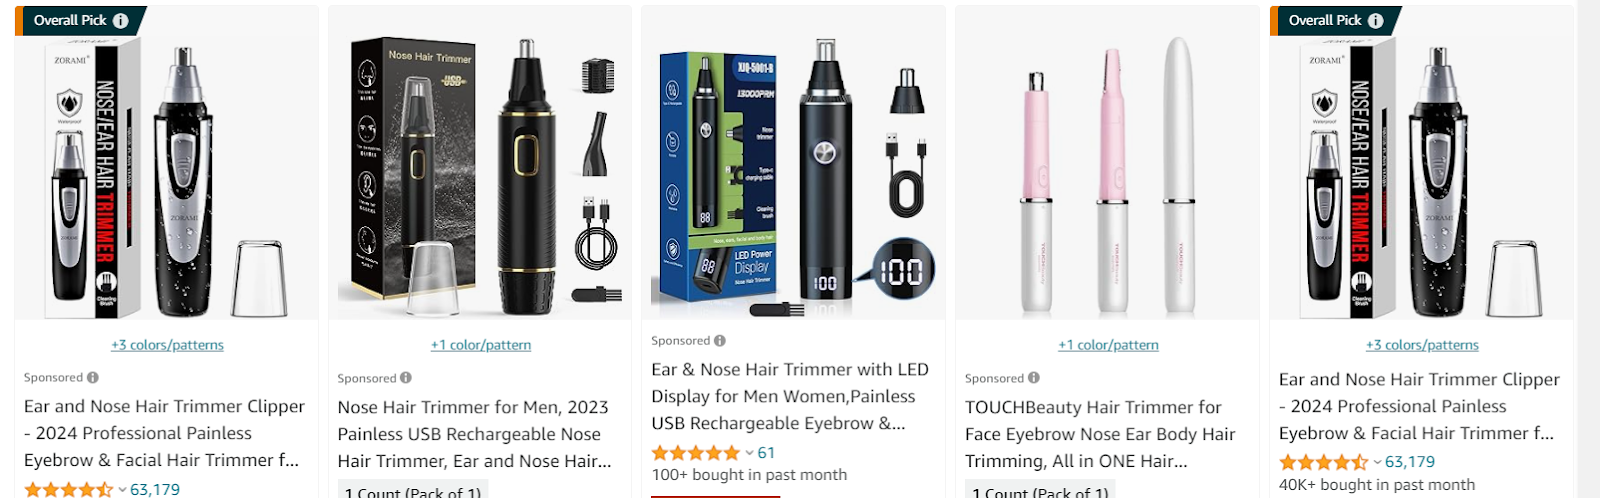 A variety of hair trimmers displayed, highlighting their prices and store ratings.